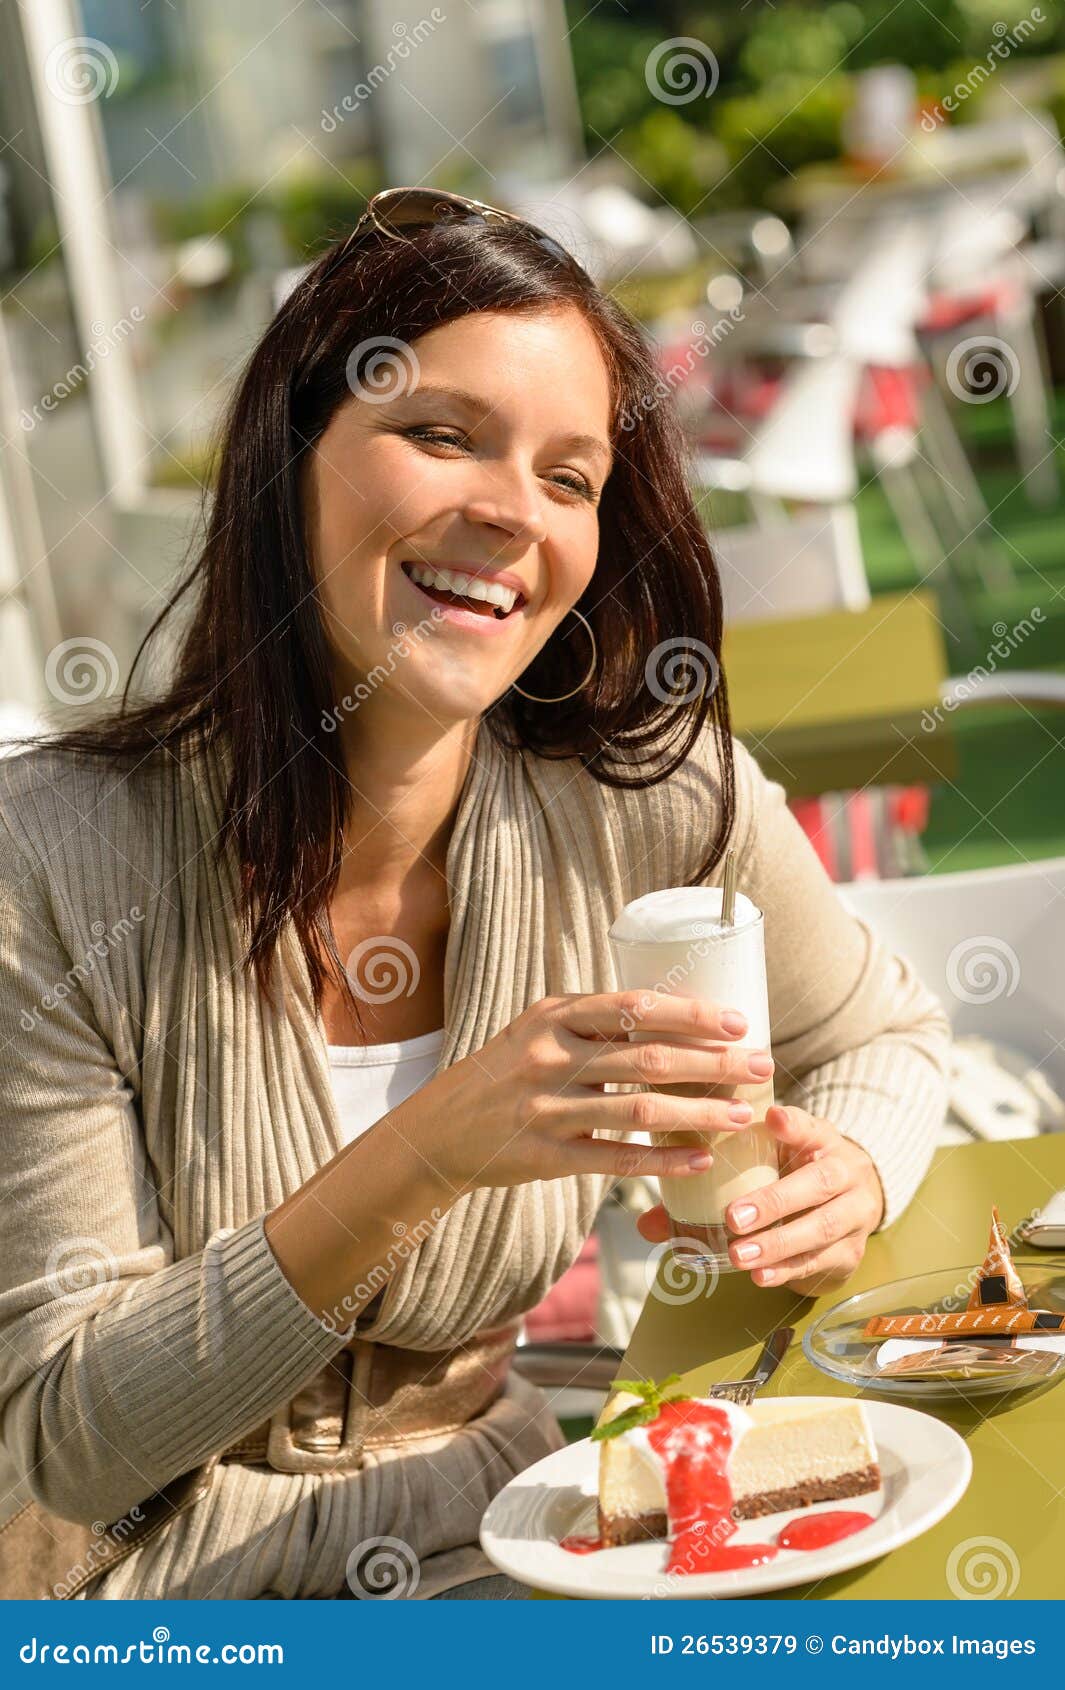 woman at cafe bar holding latte drink